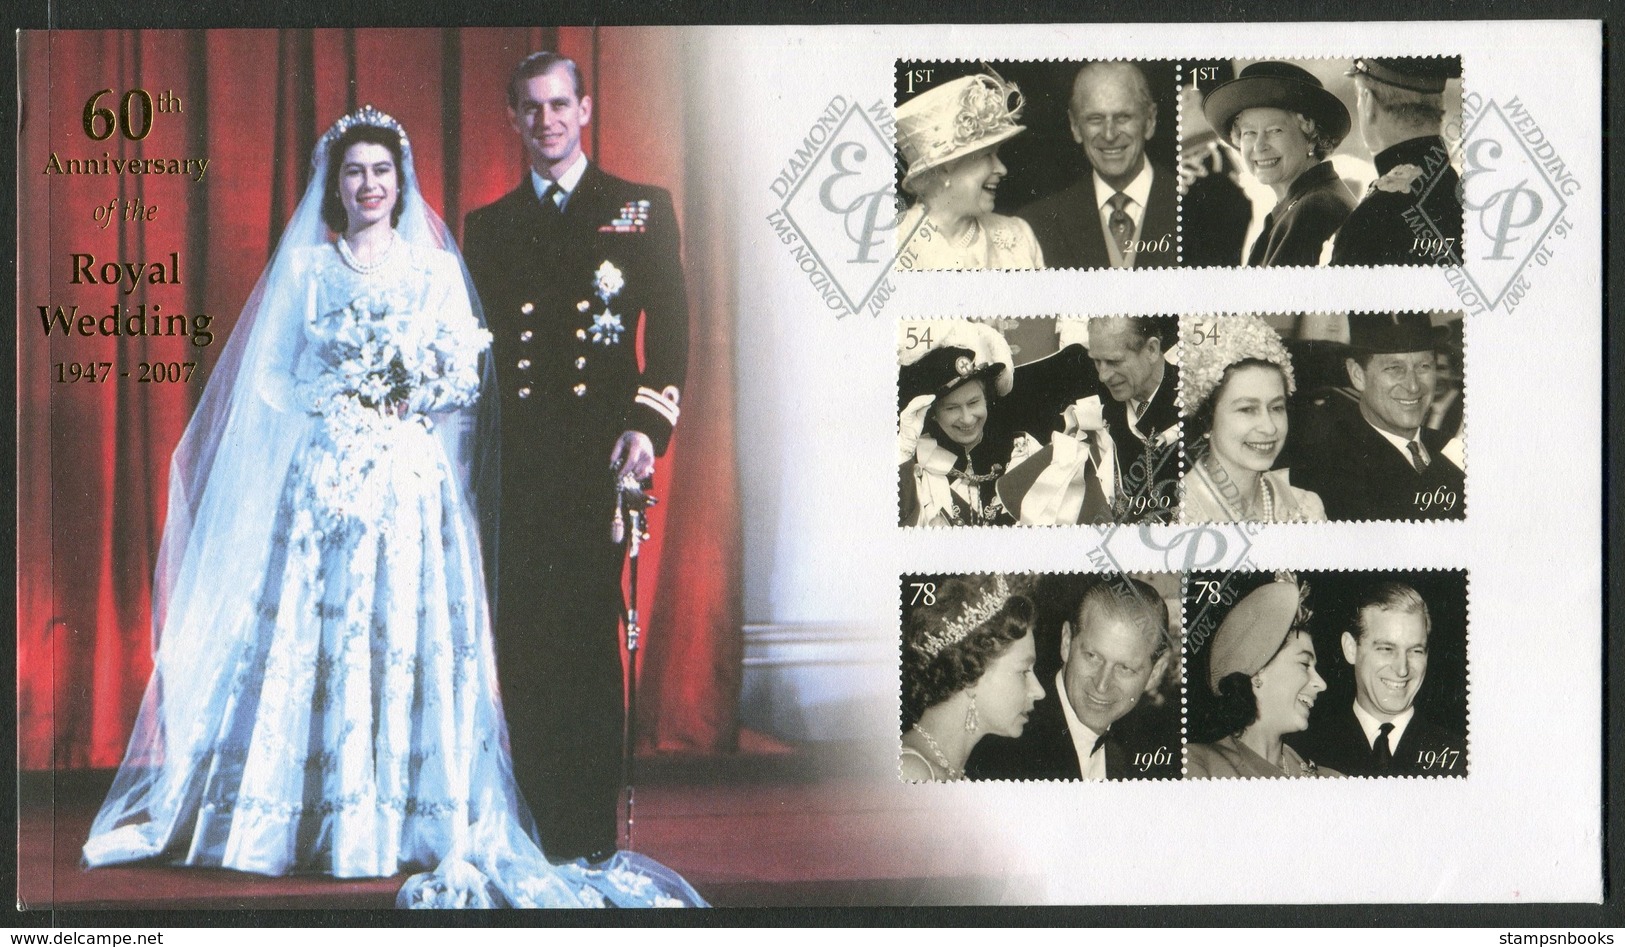 2007 GB 60th Anniversary Of Royal Wedding First Day Cover. Queen Elizabeth 2nd Diamond Wedding FDC - 2001-2010 Decimal Issues